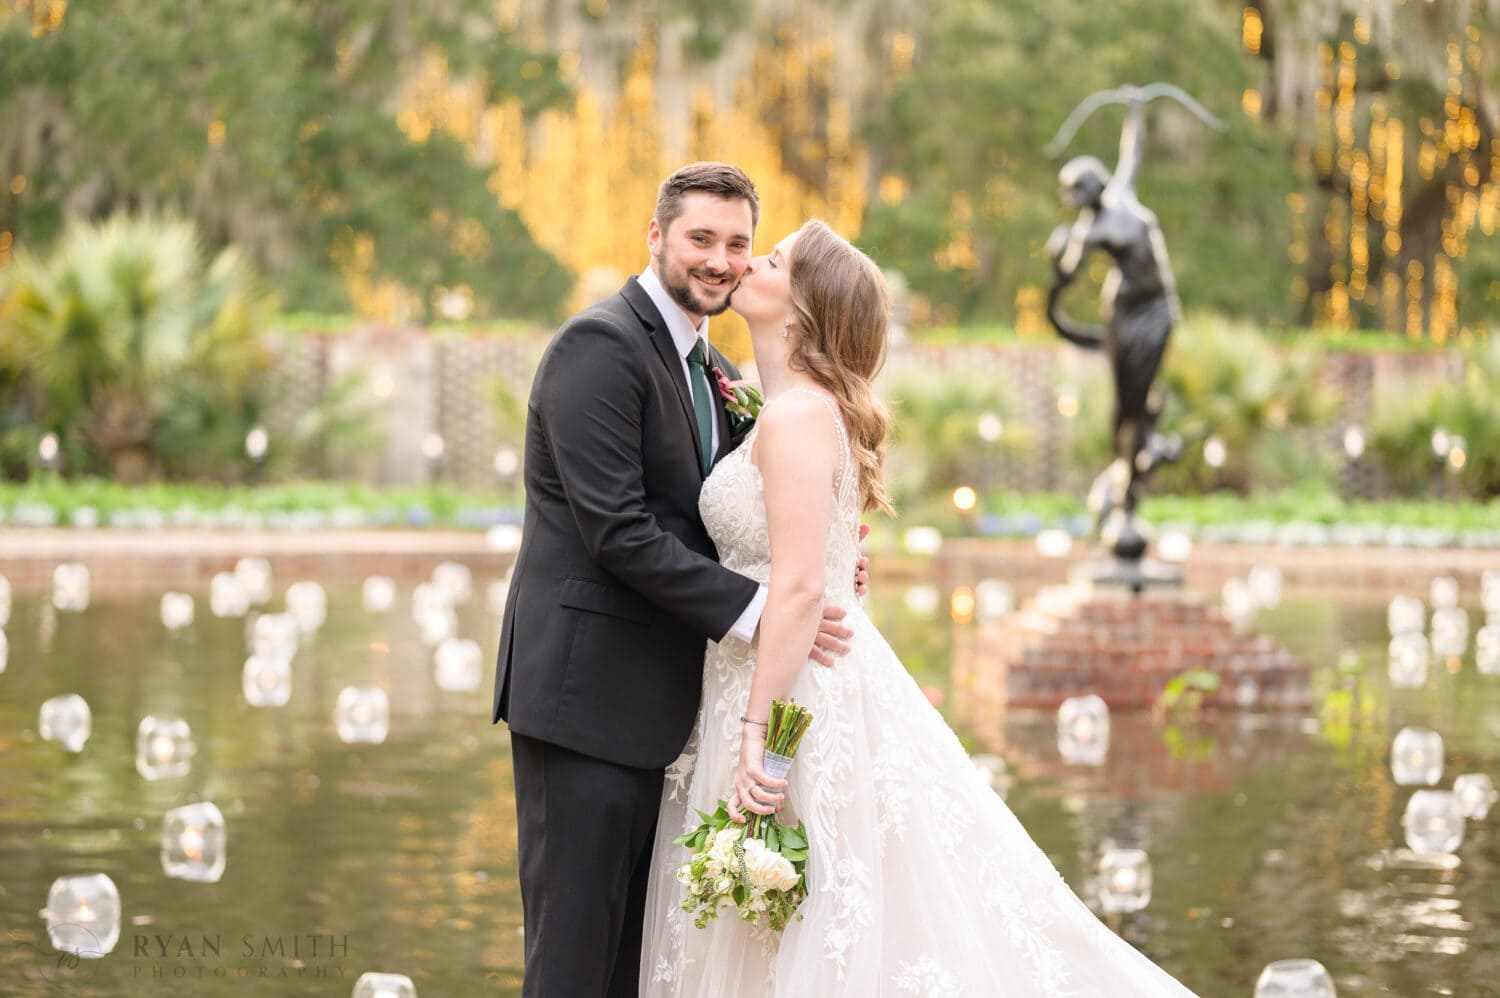 Bride kissing groom on the cheek - Diana of the Chase Fountain - Brookgreen Gardens